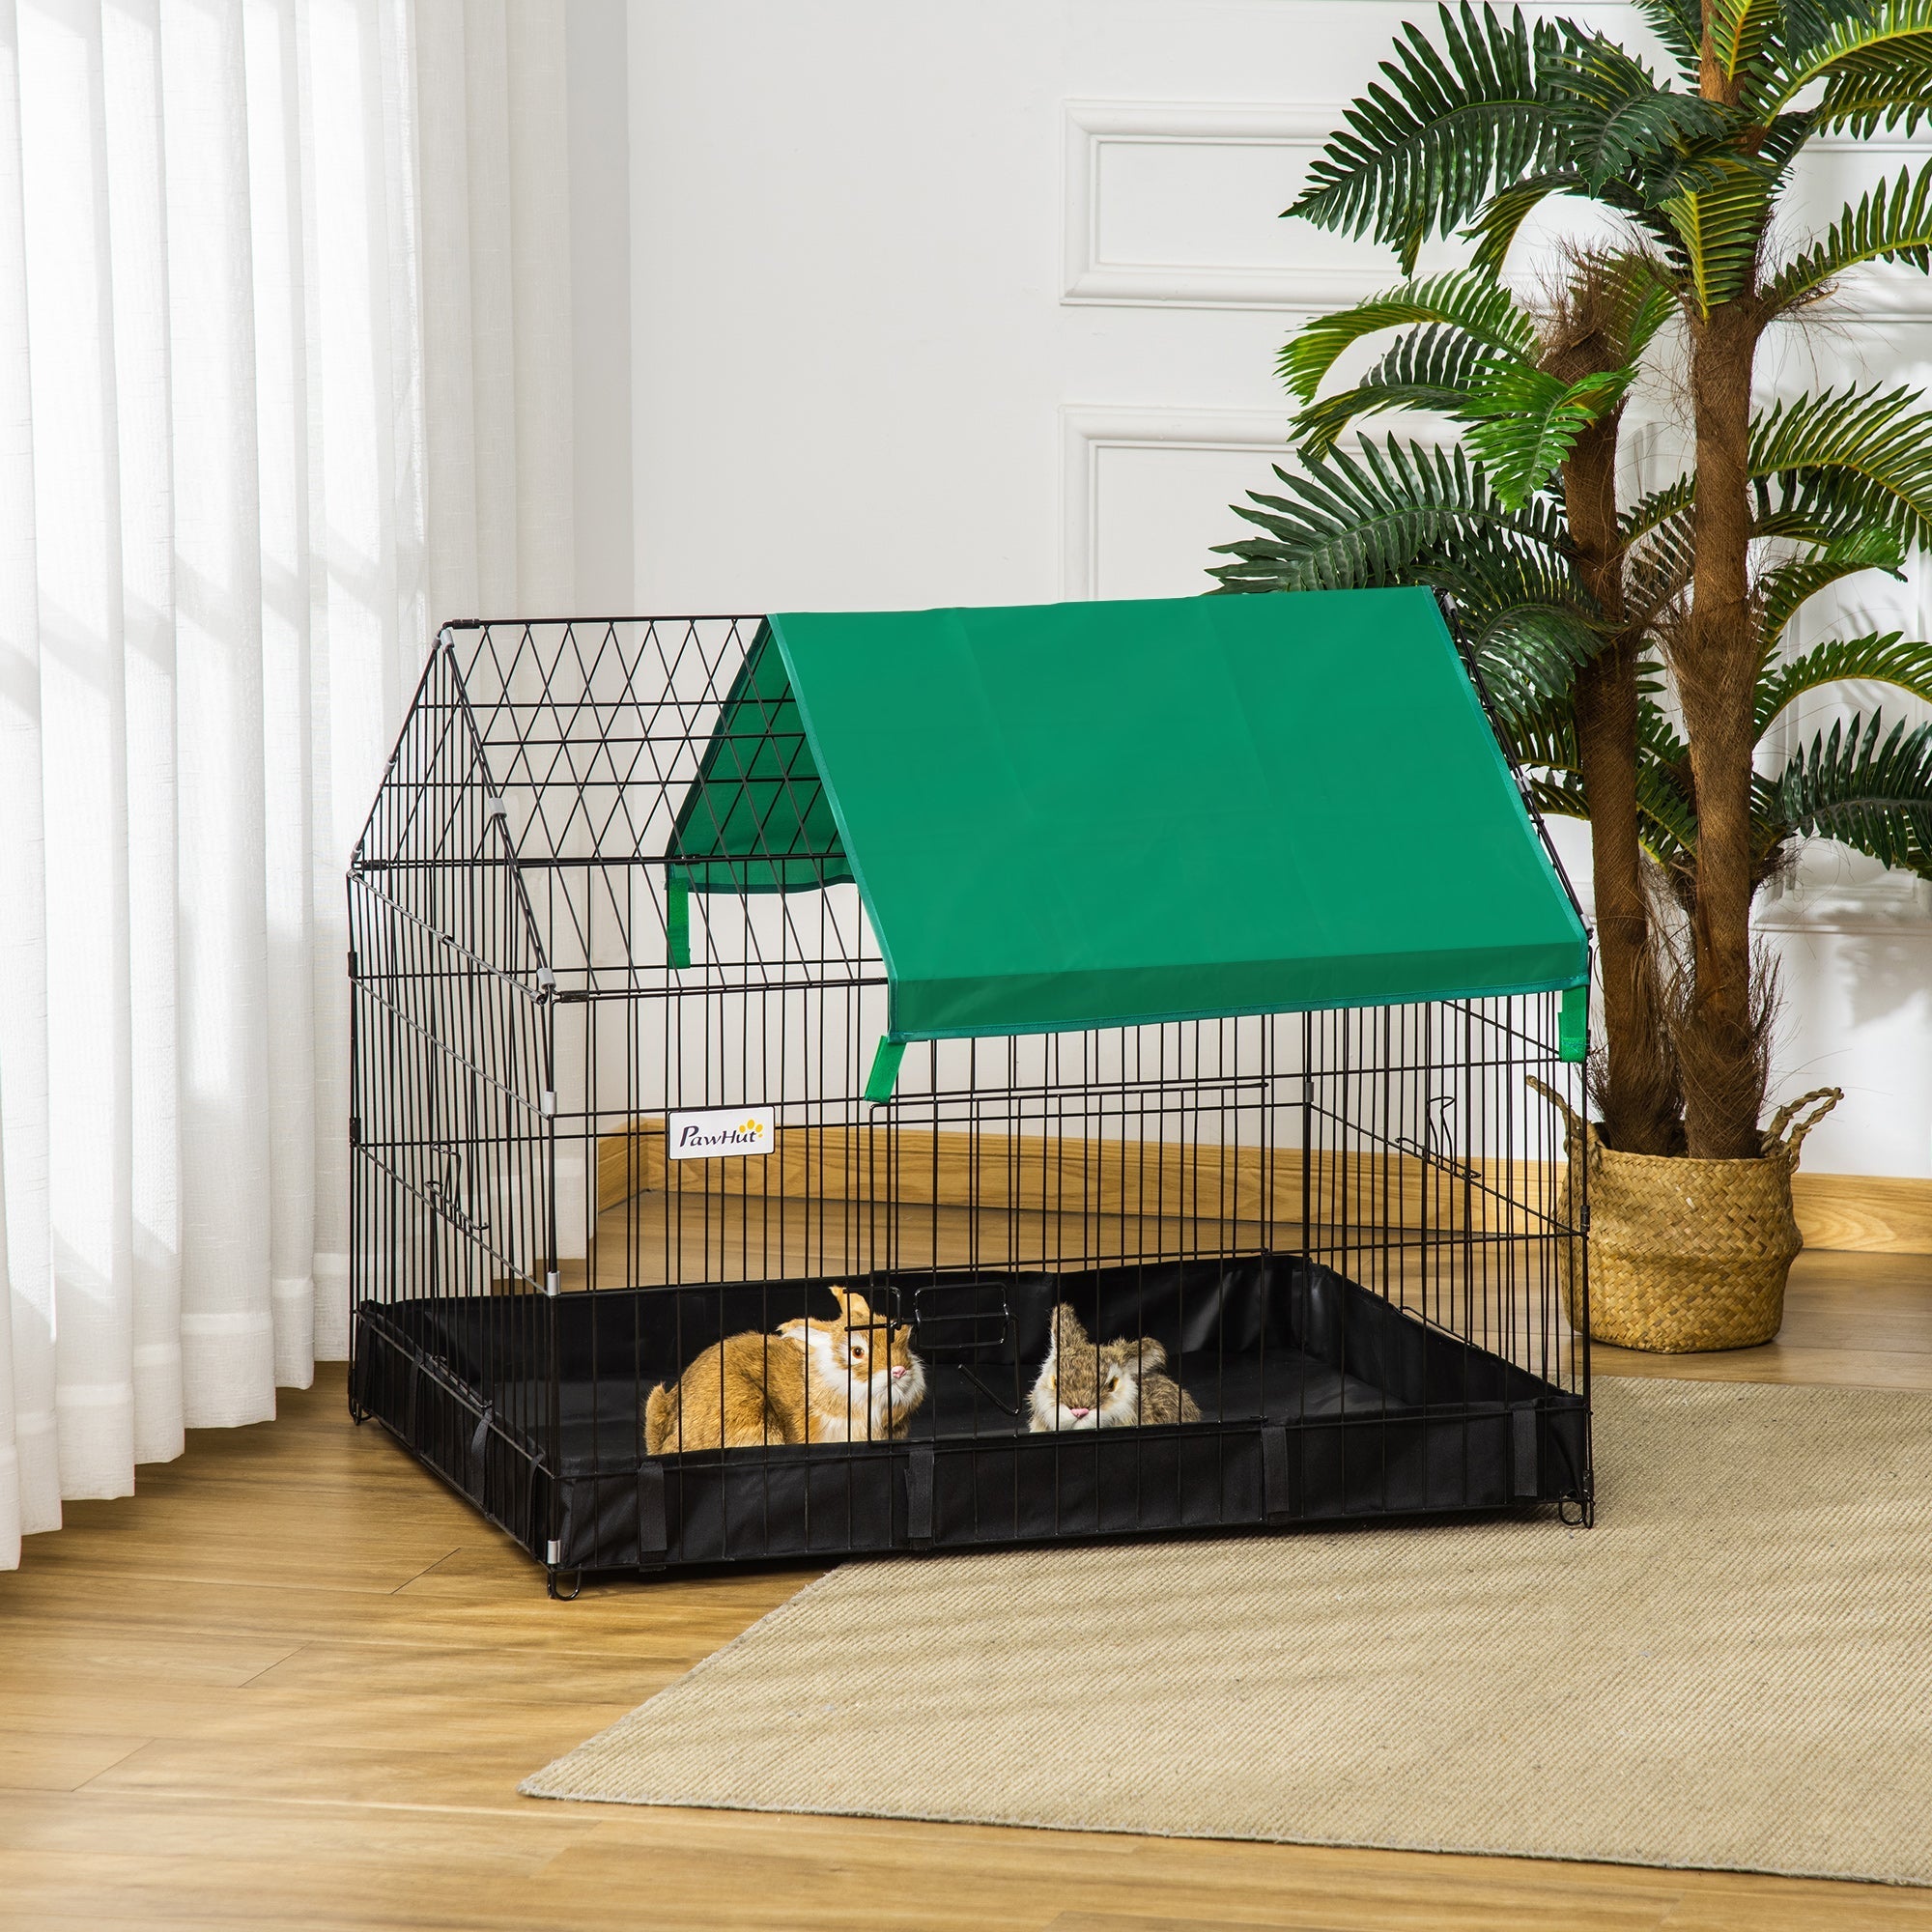 Guinea Pig Cage Small Animal Habitat Rabbit House, Safety Locking System, with No Leaking Bottom, Top Roof, Doors, 90 x 75 x 75 cm, PawHut,